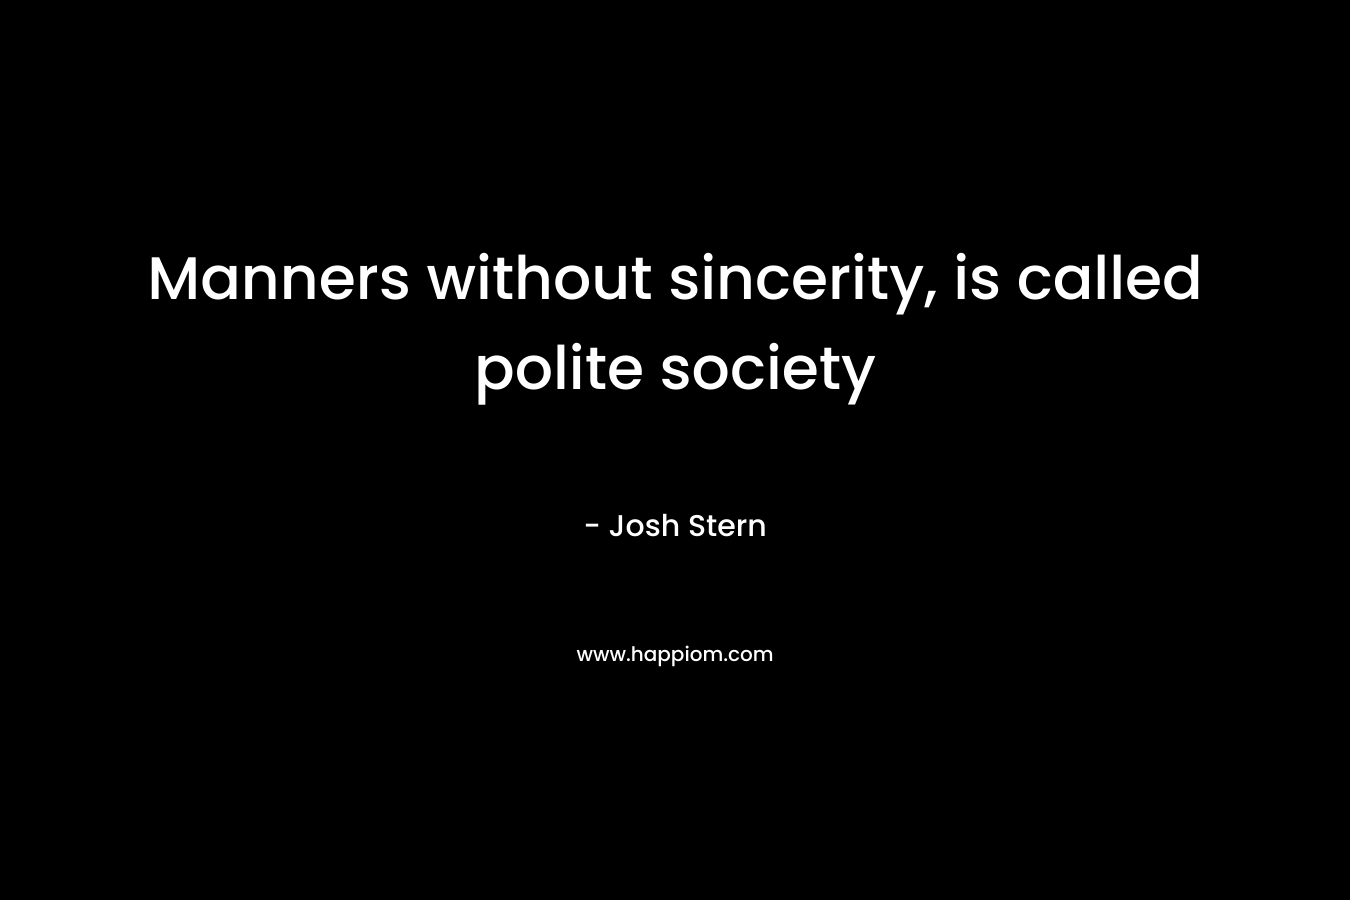 Manners without sincerity, is called polite society